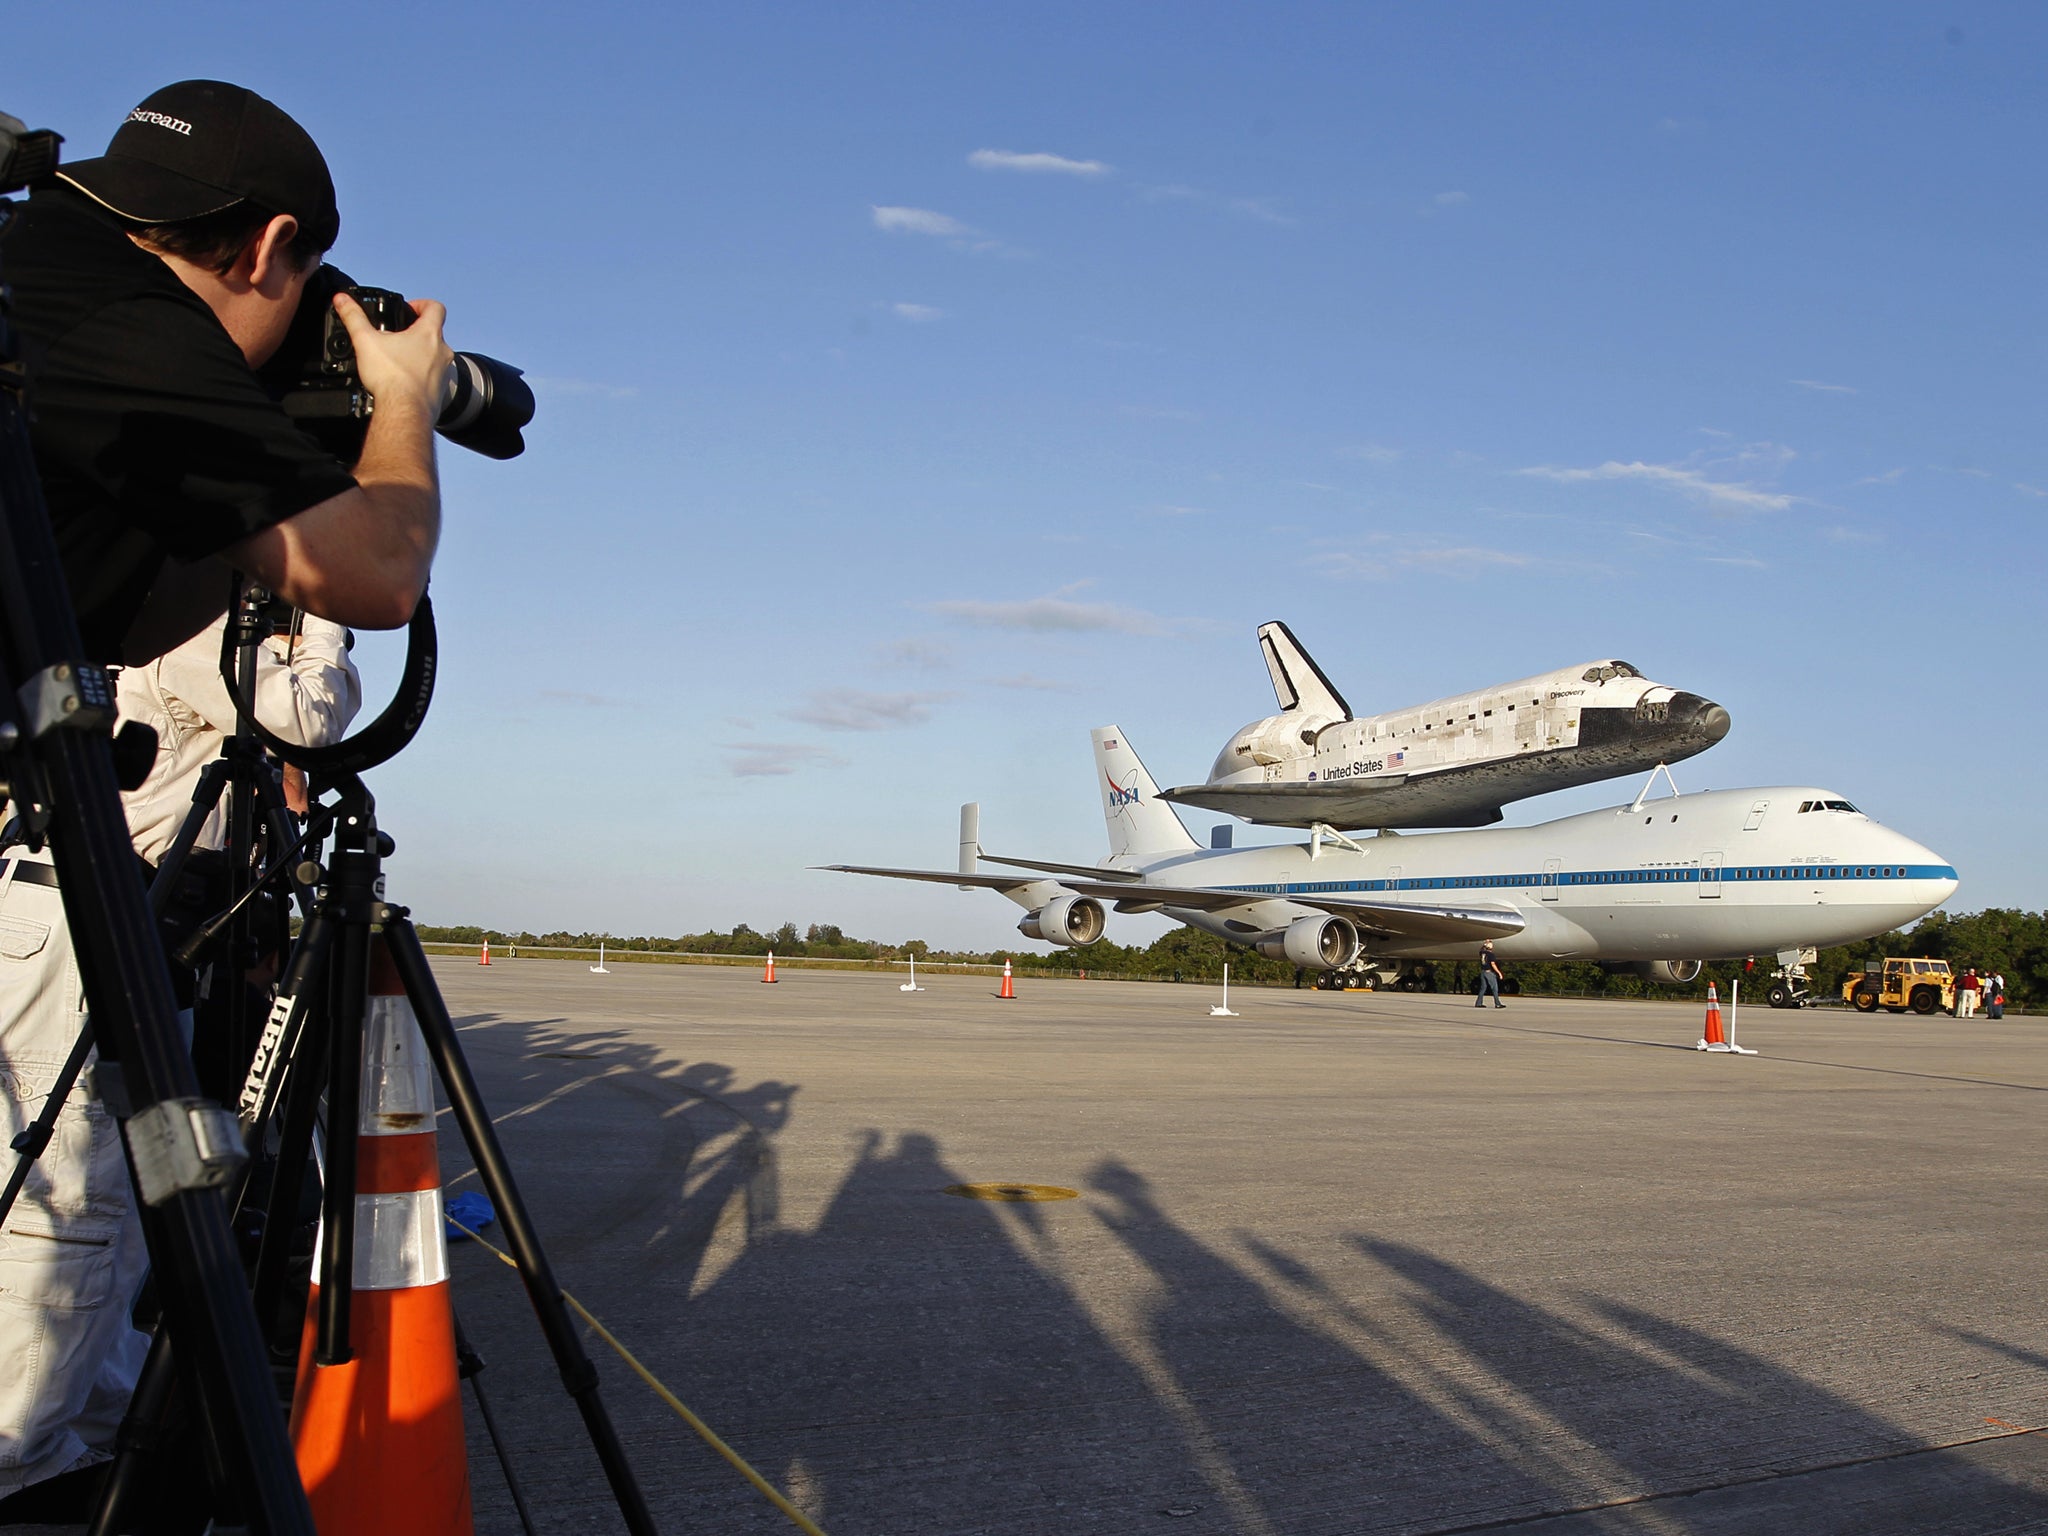 Press take photos of the Space Shuttle at the Smithsonian